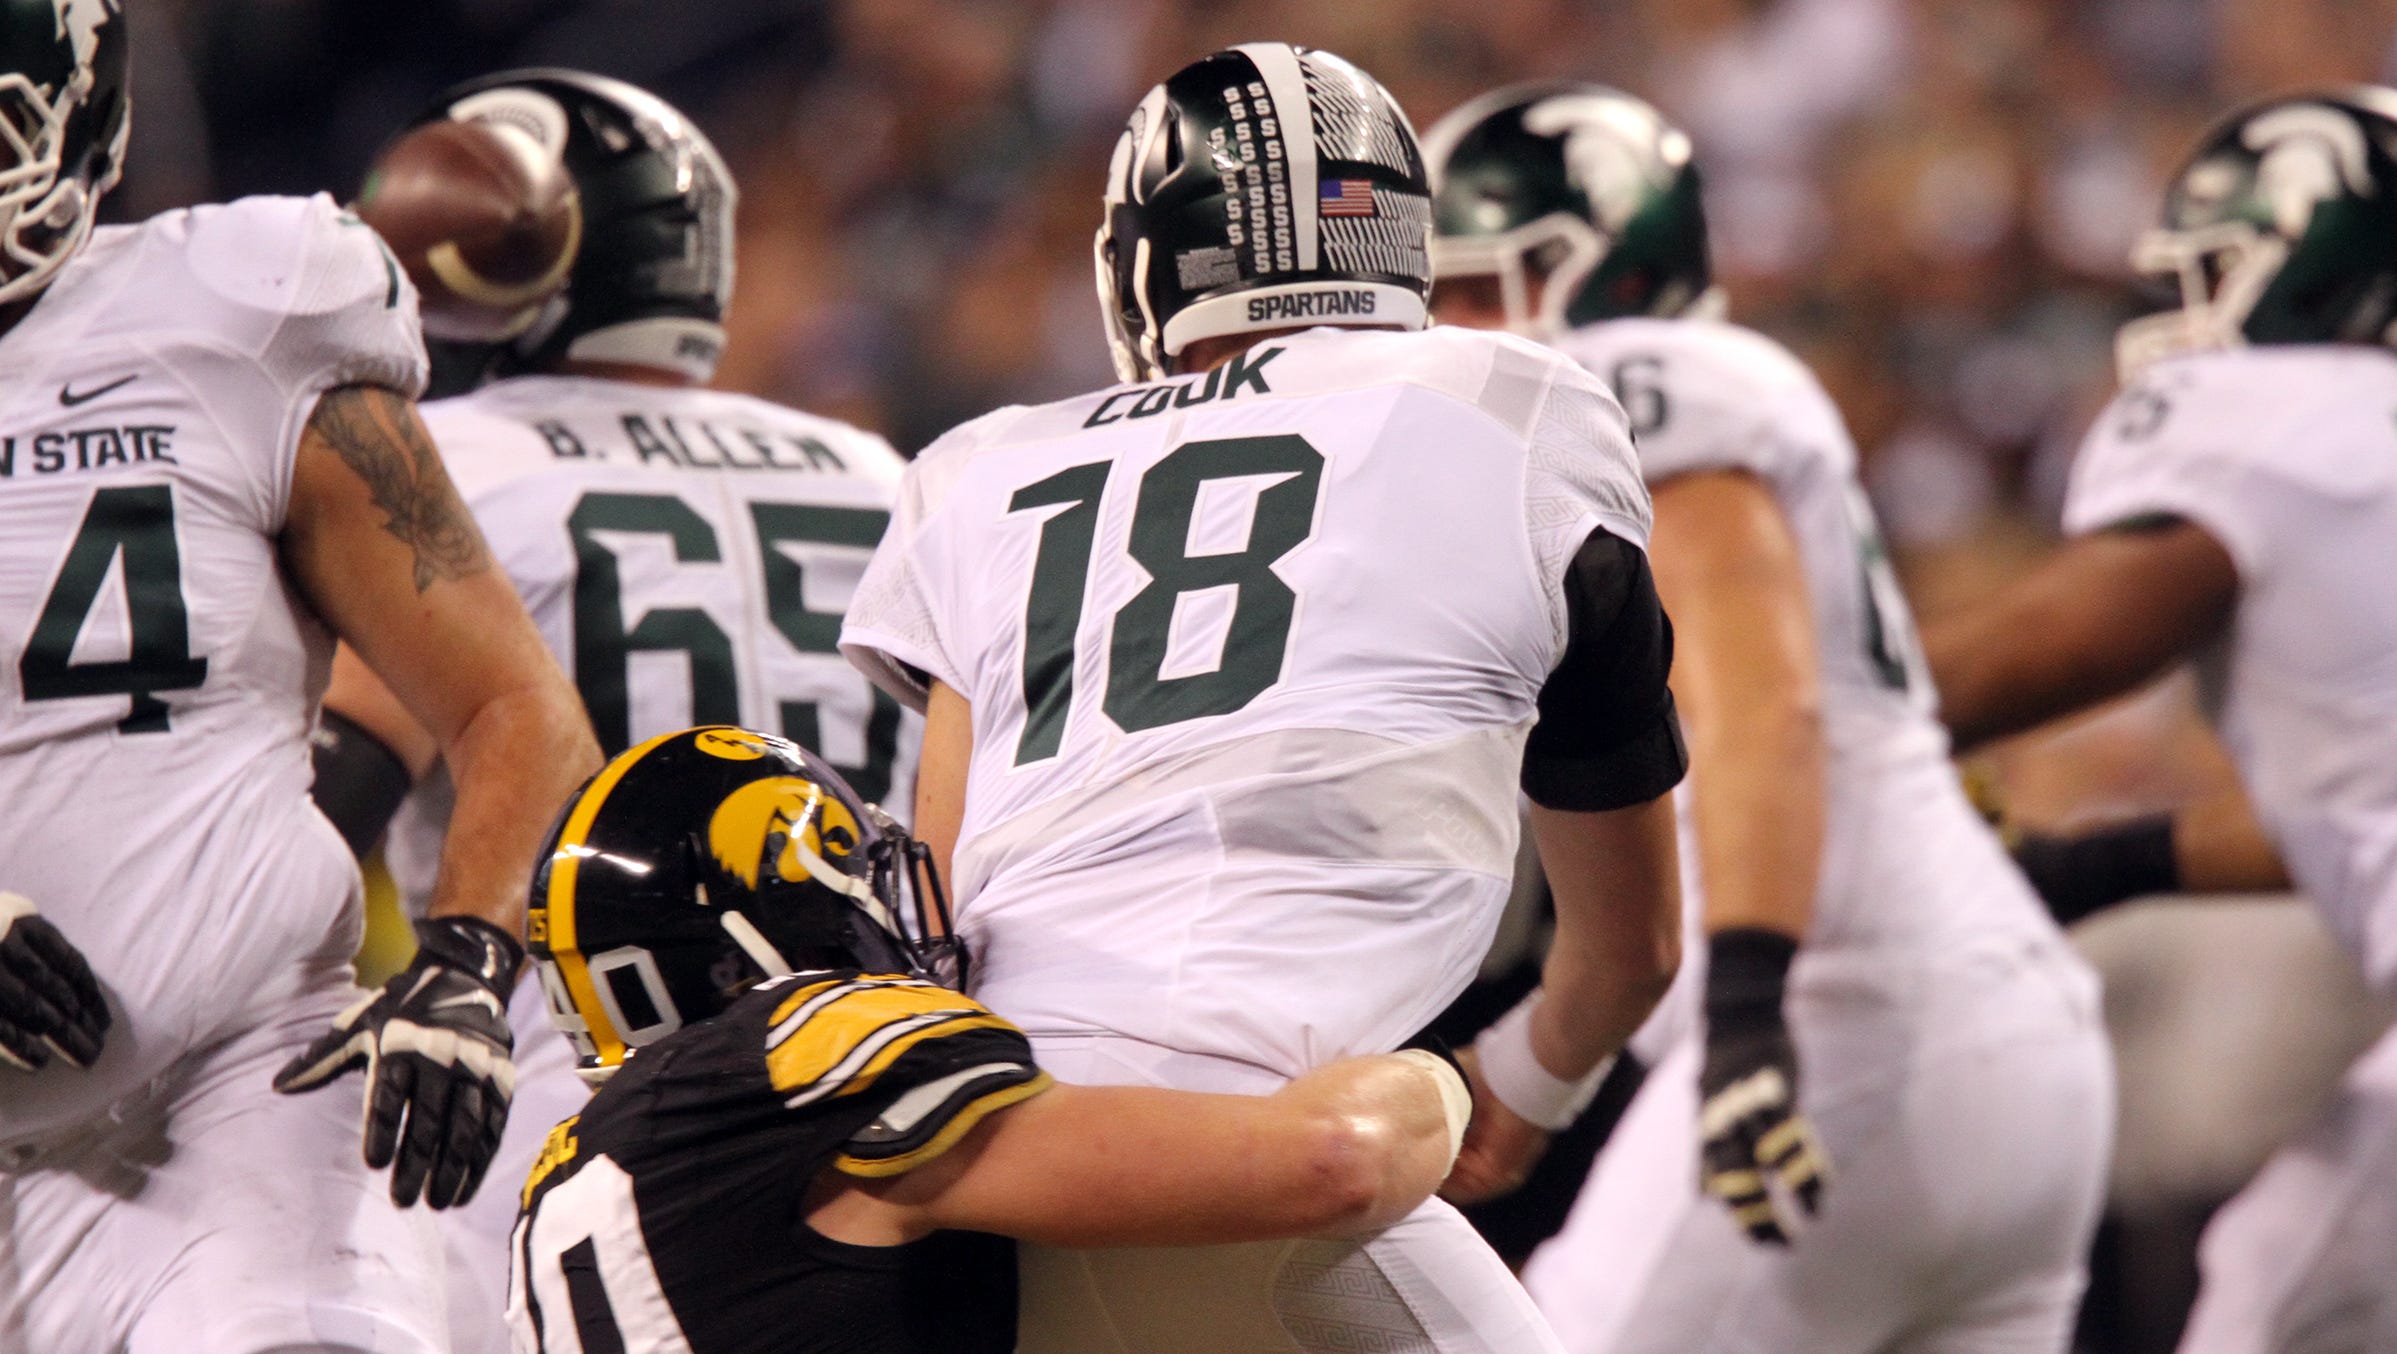 Iowa's Parker Hesse forces a fumble from Michigan State quarterback Connor Cook during the Big Ten Championship game at Lucas Oil Stadium in Indianapolis, Ind. on Saturday, Dec. 5, 2015.